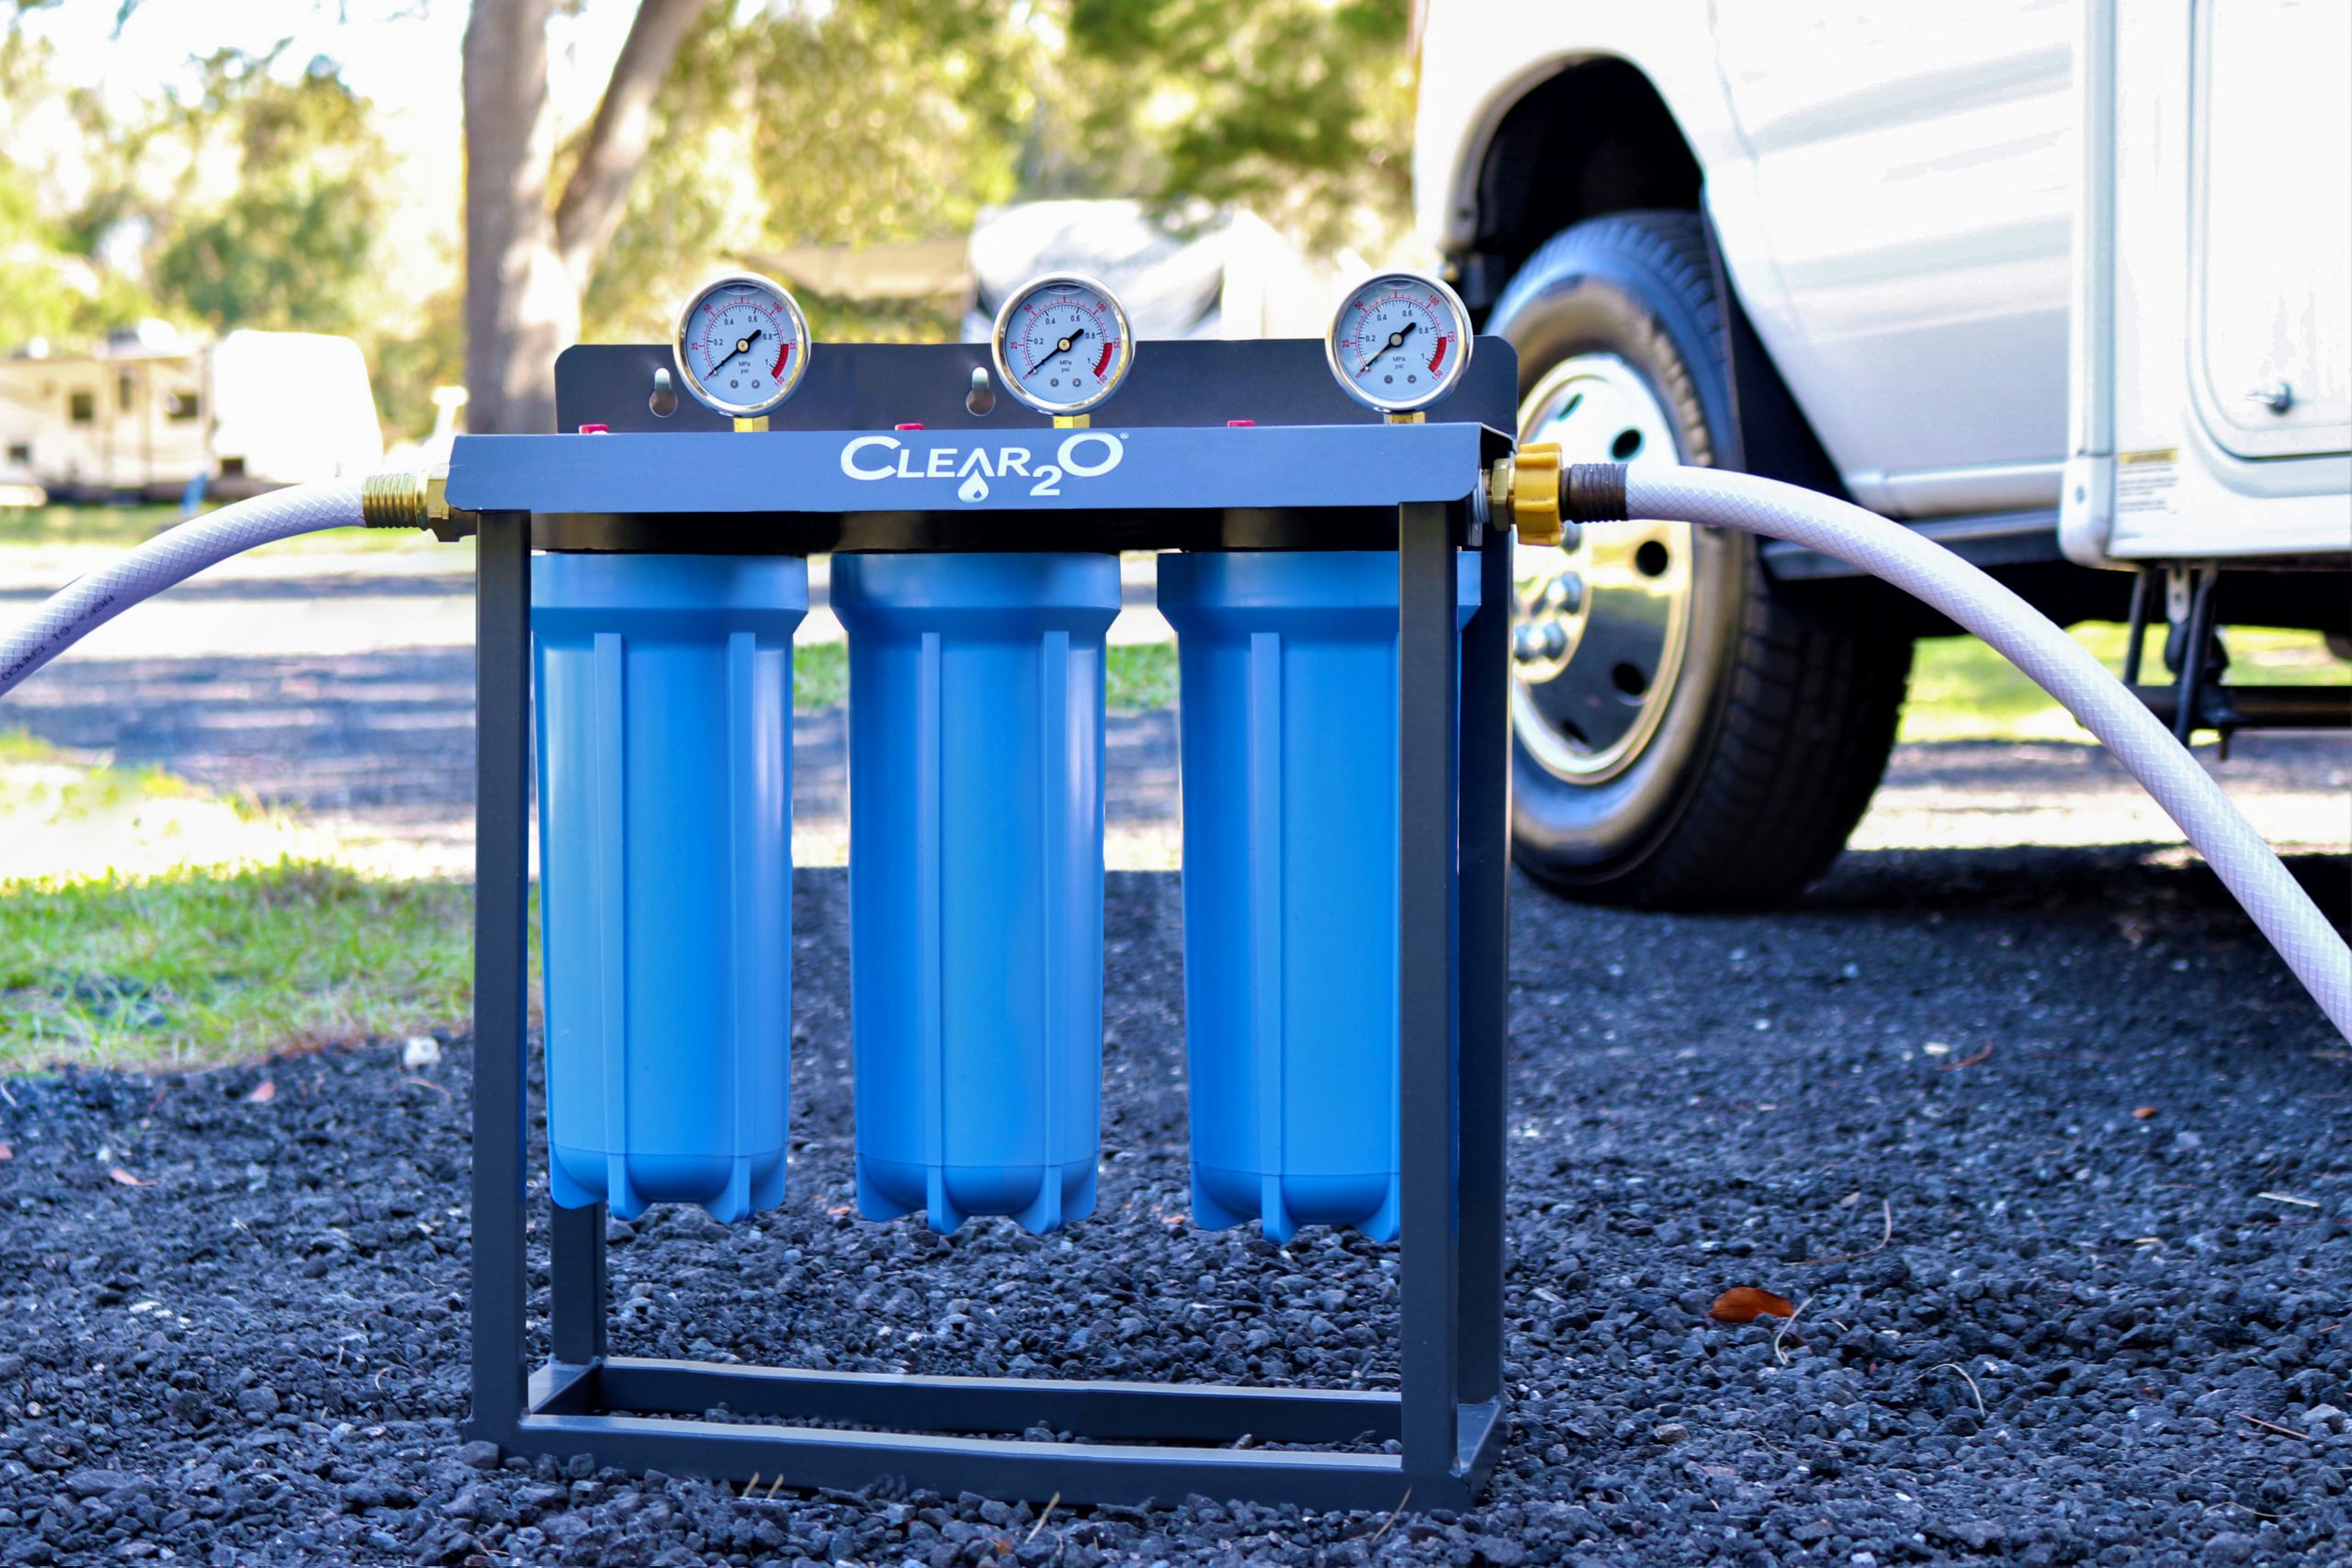 CLEAR2O RV Water Filters coming soon!